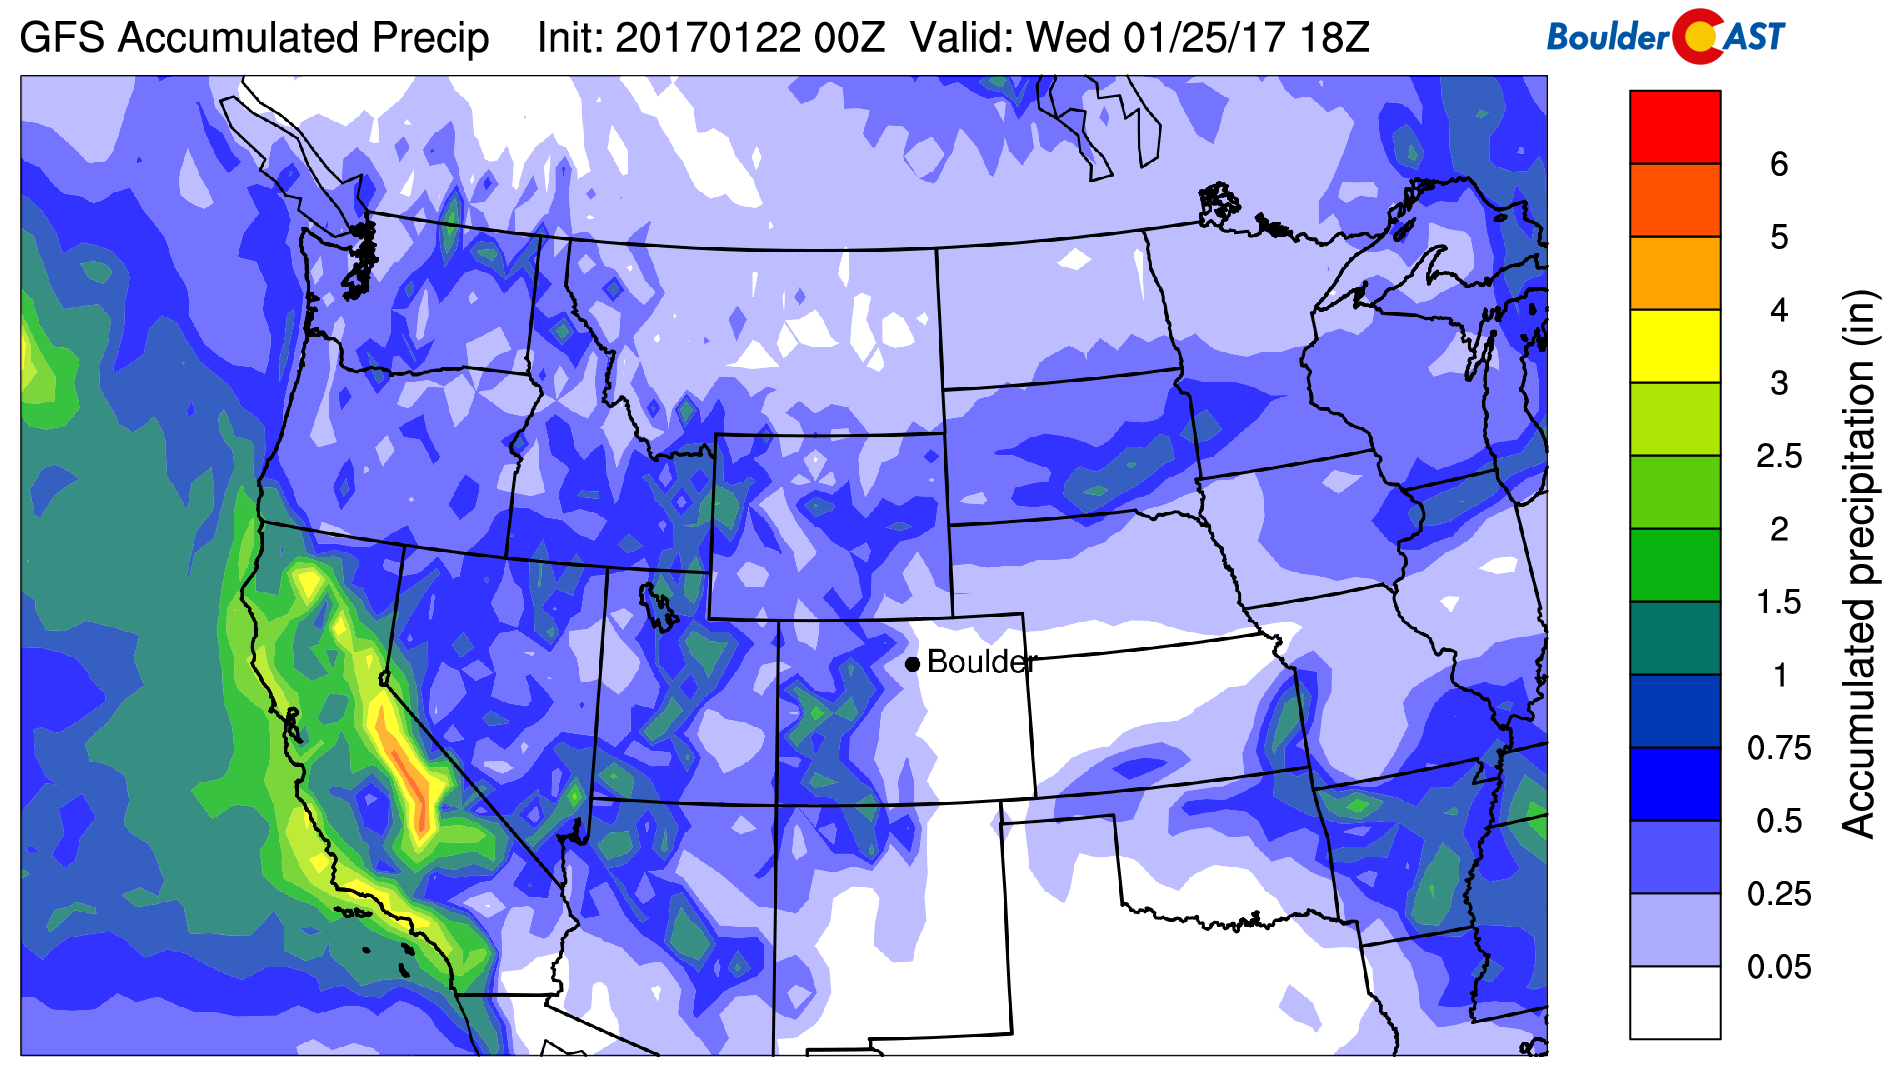 GFS total accumulated precipitation forecast showing most will remain to our north in Wyoming